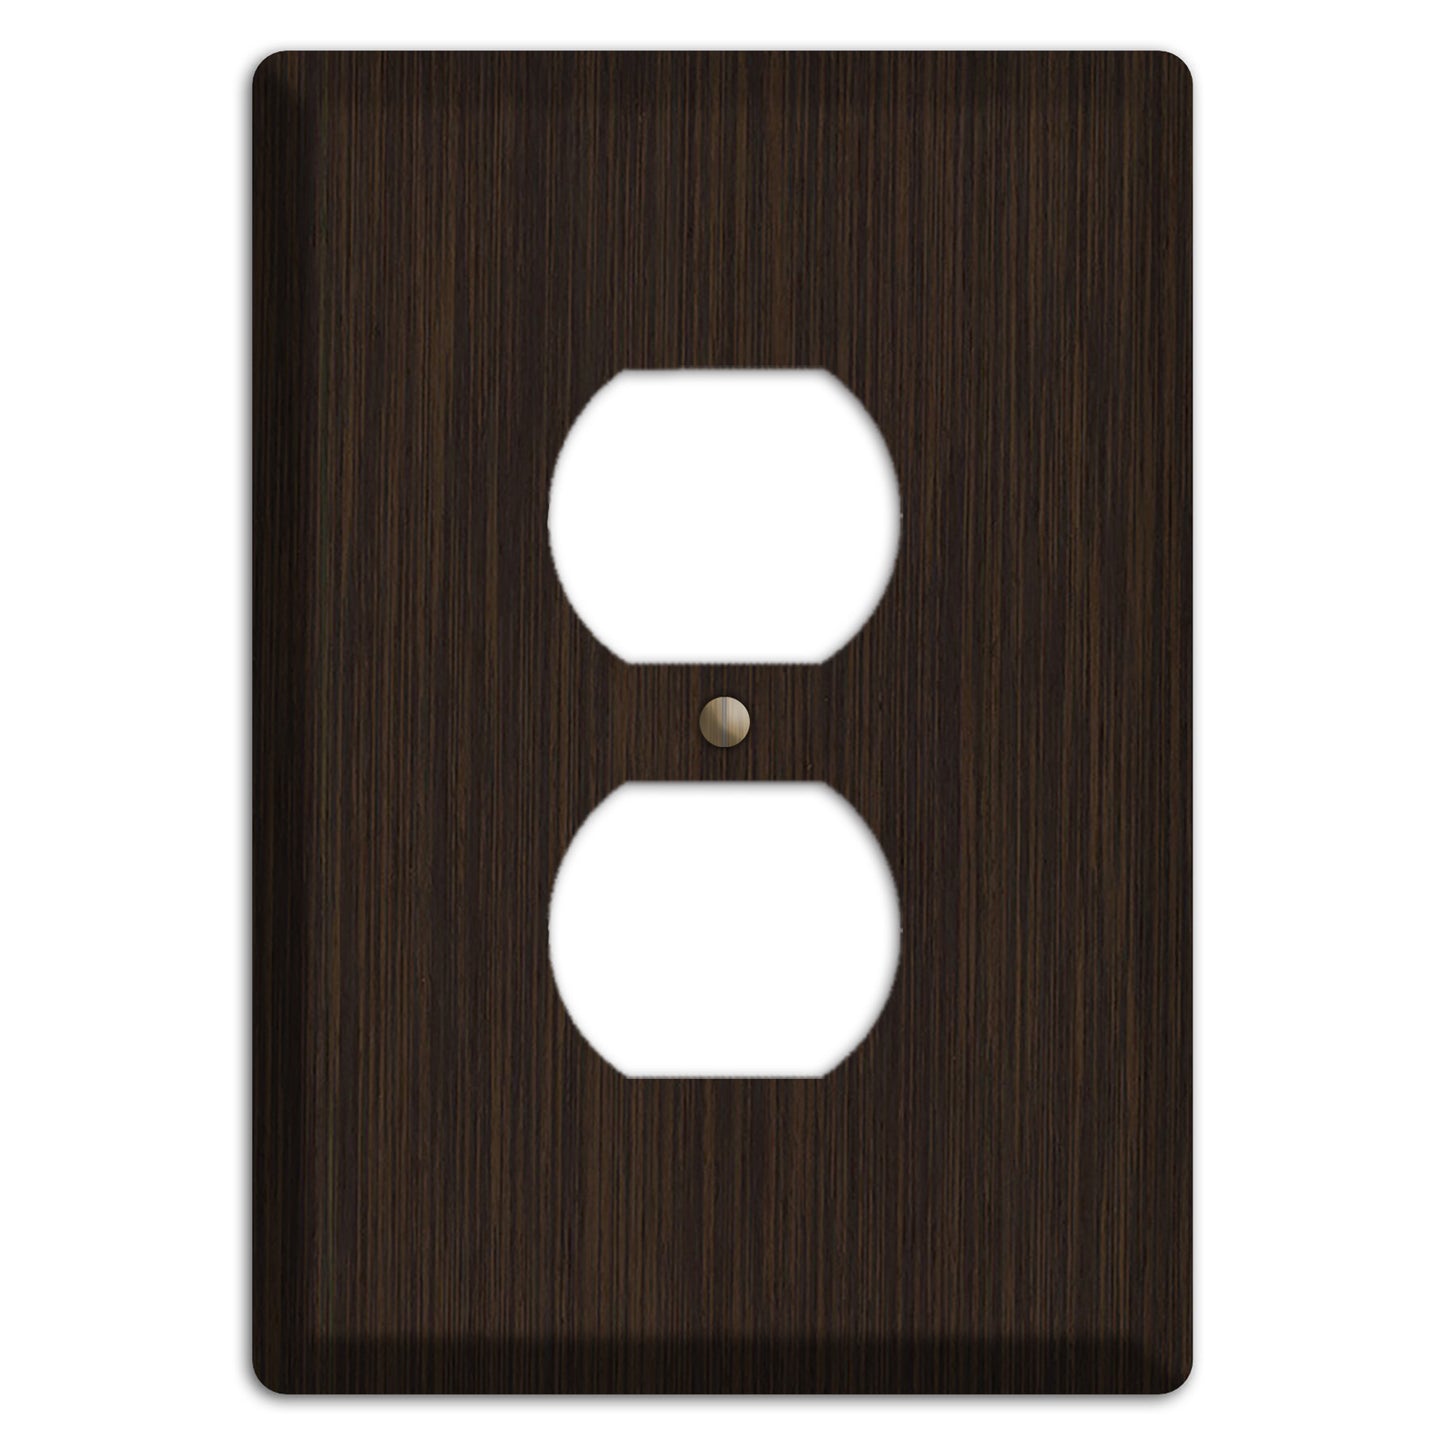 Wenge Wood Duplex Outlet Cover Plate